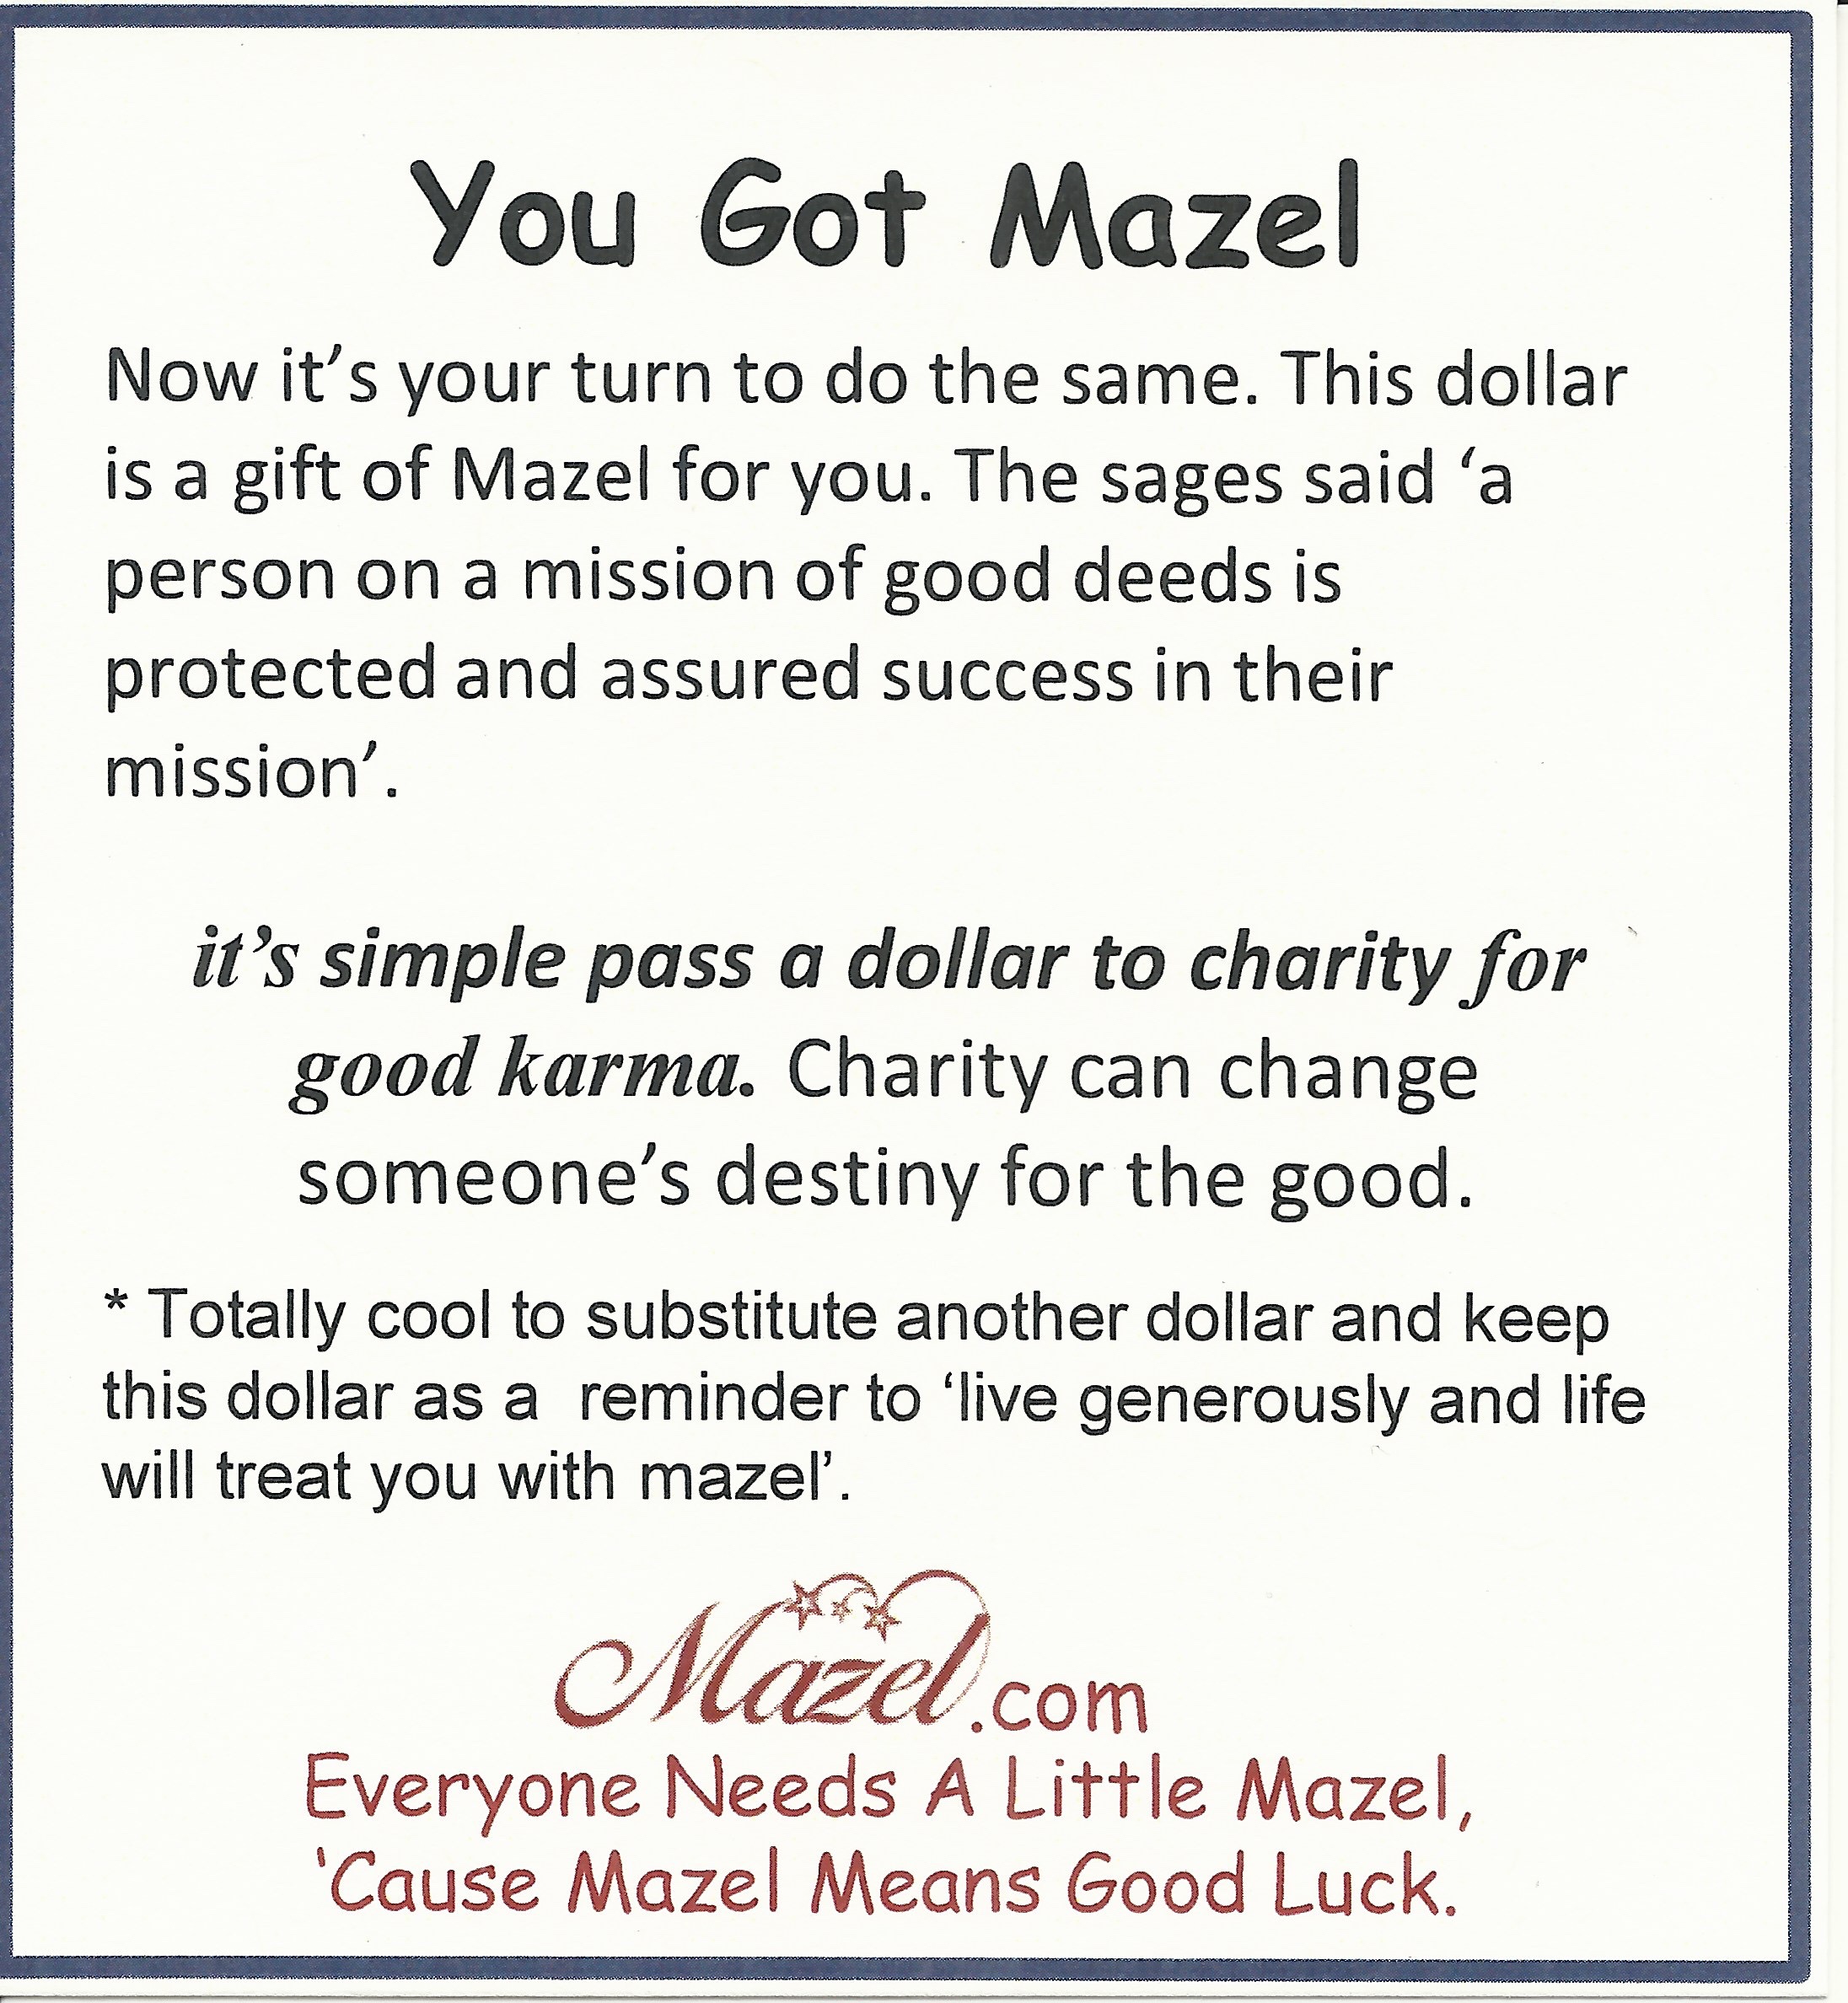 The Best Part of Waking Up is Mazel in Your Cup